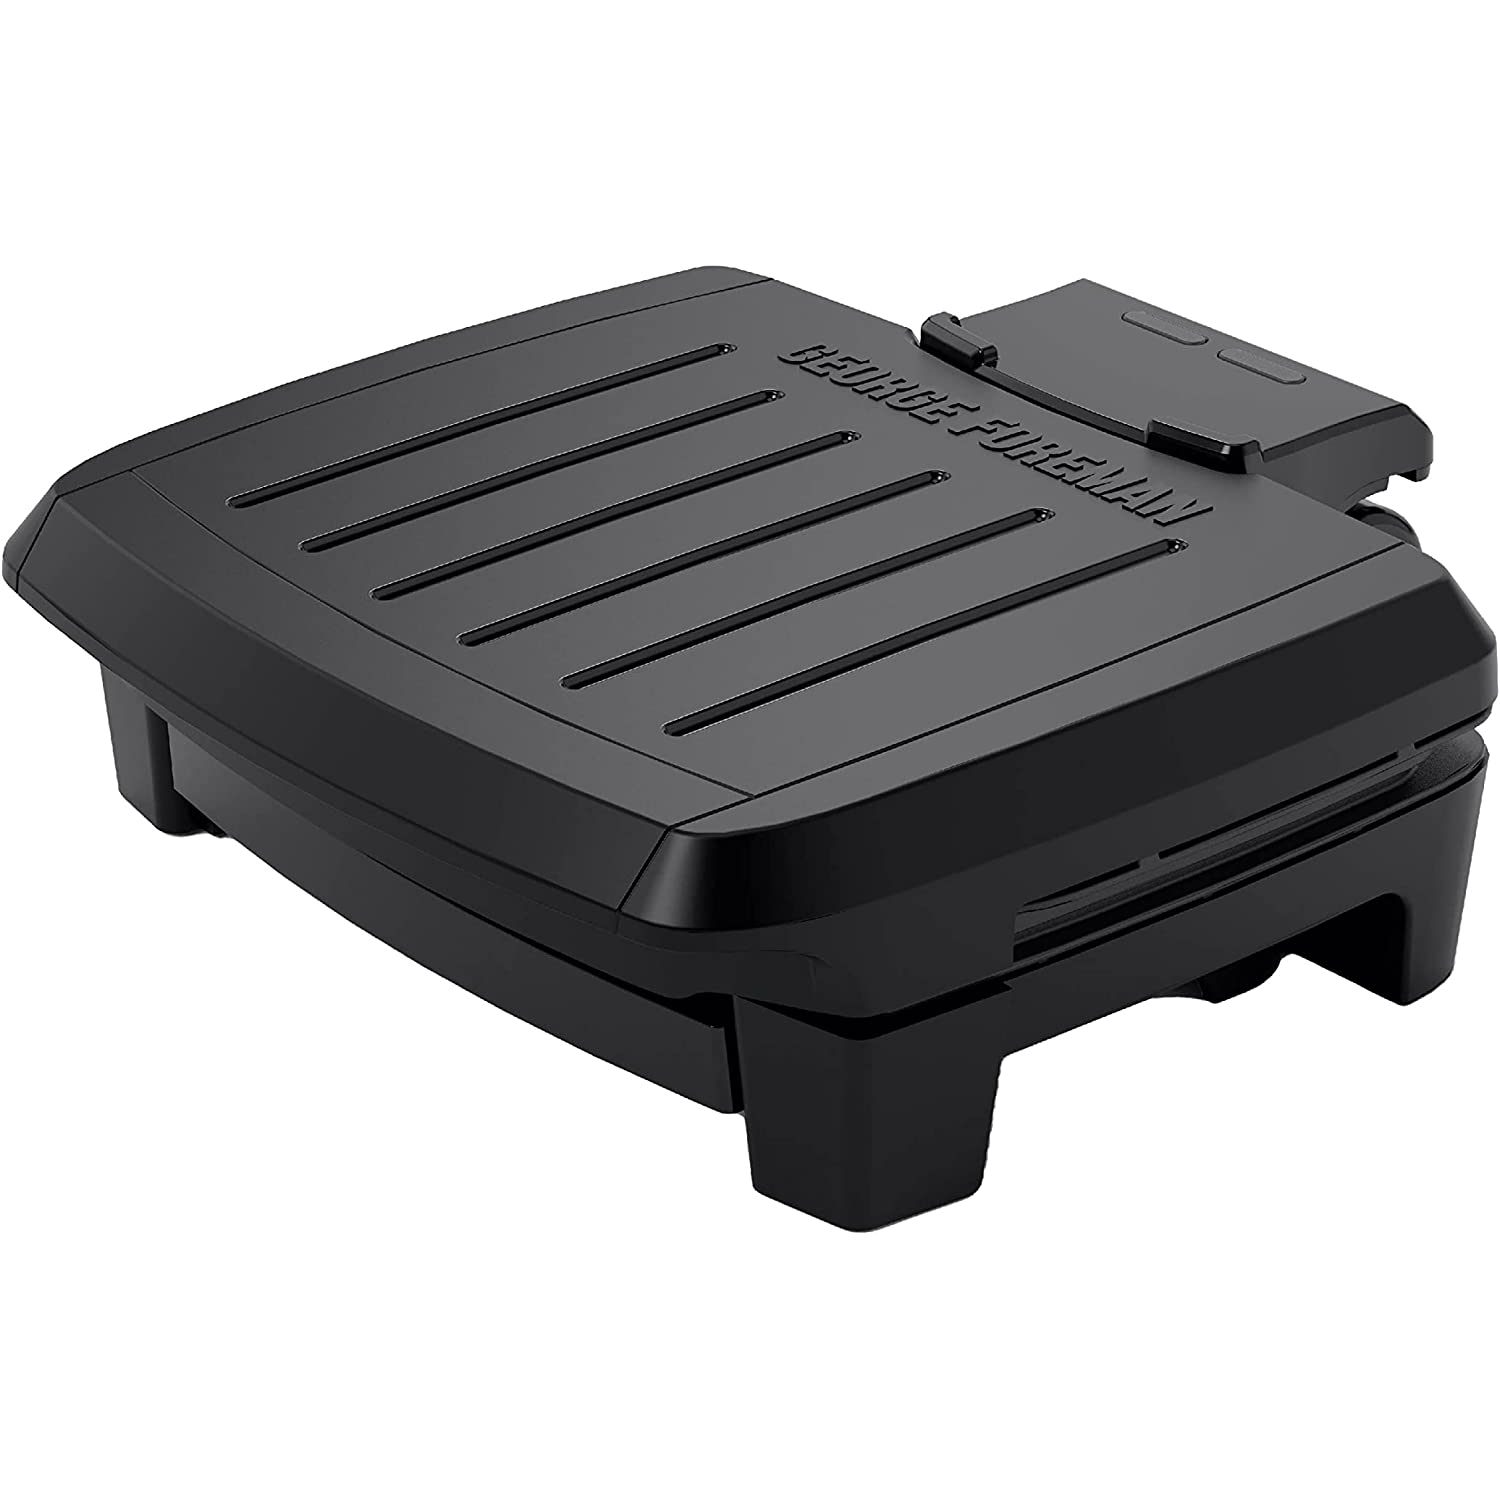 George Foreman 4-serving Contact Submersible indoor Grill, Dishwasher Safe, Wash the Entire Grill, Easy-to-Clean Nonstick - Black (GRES060BS)